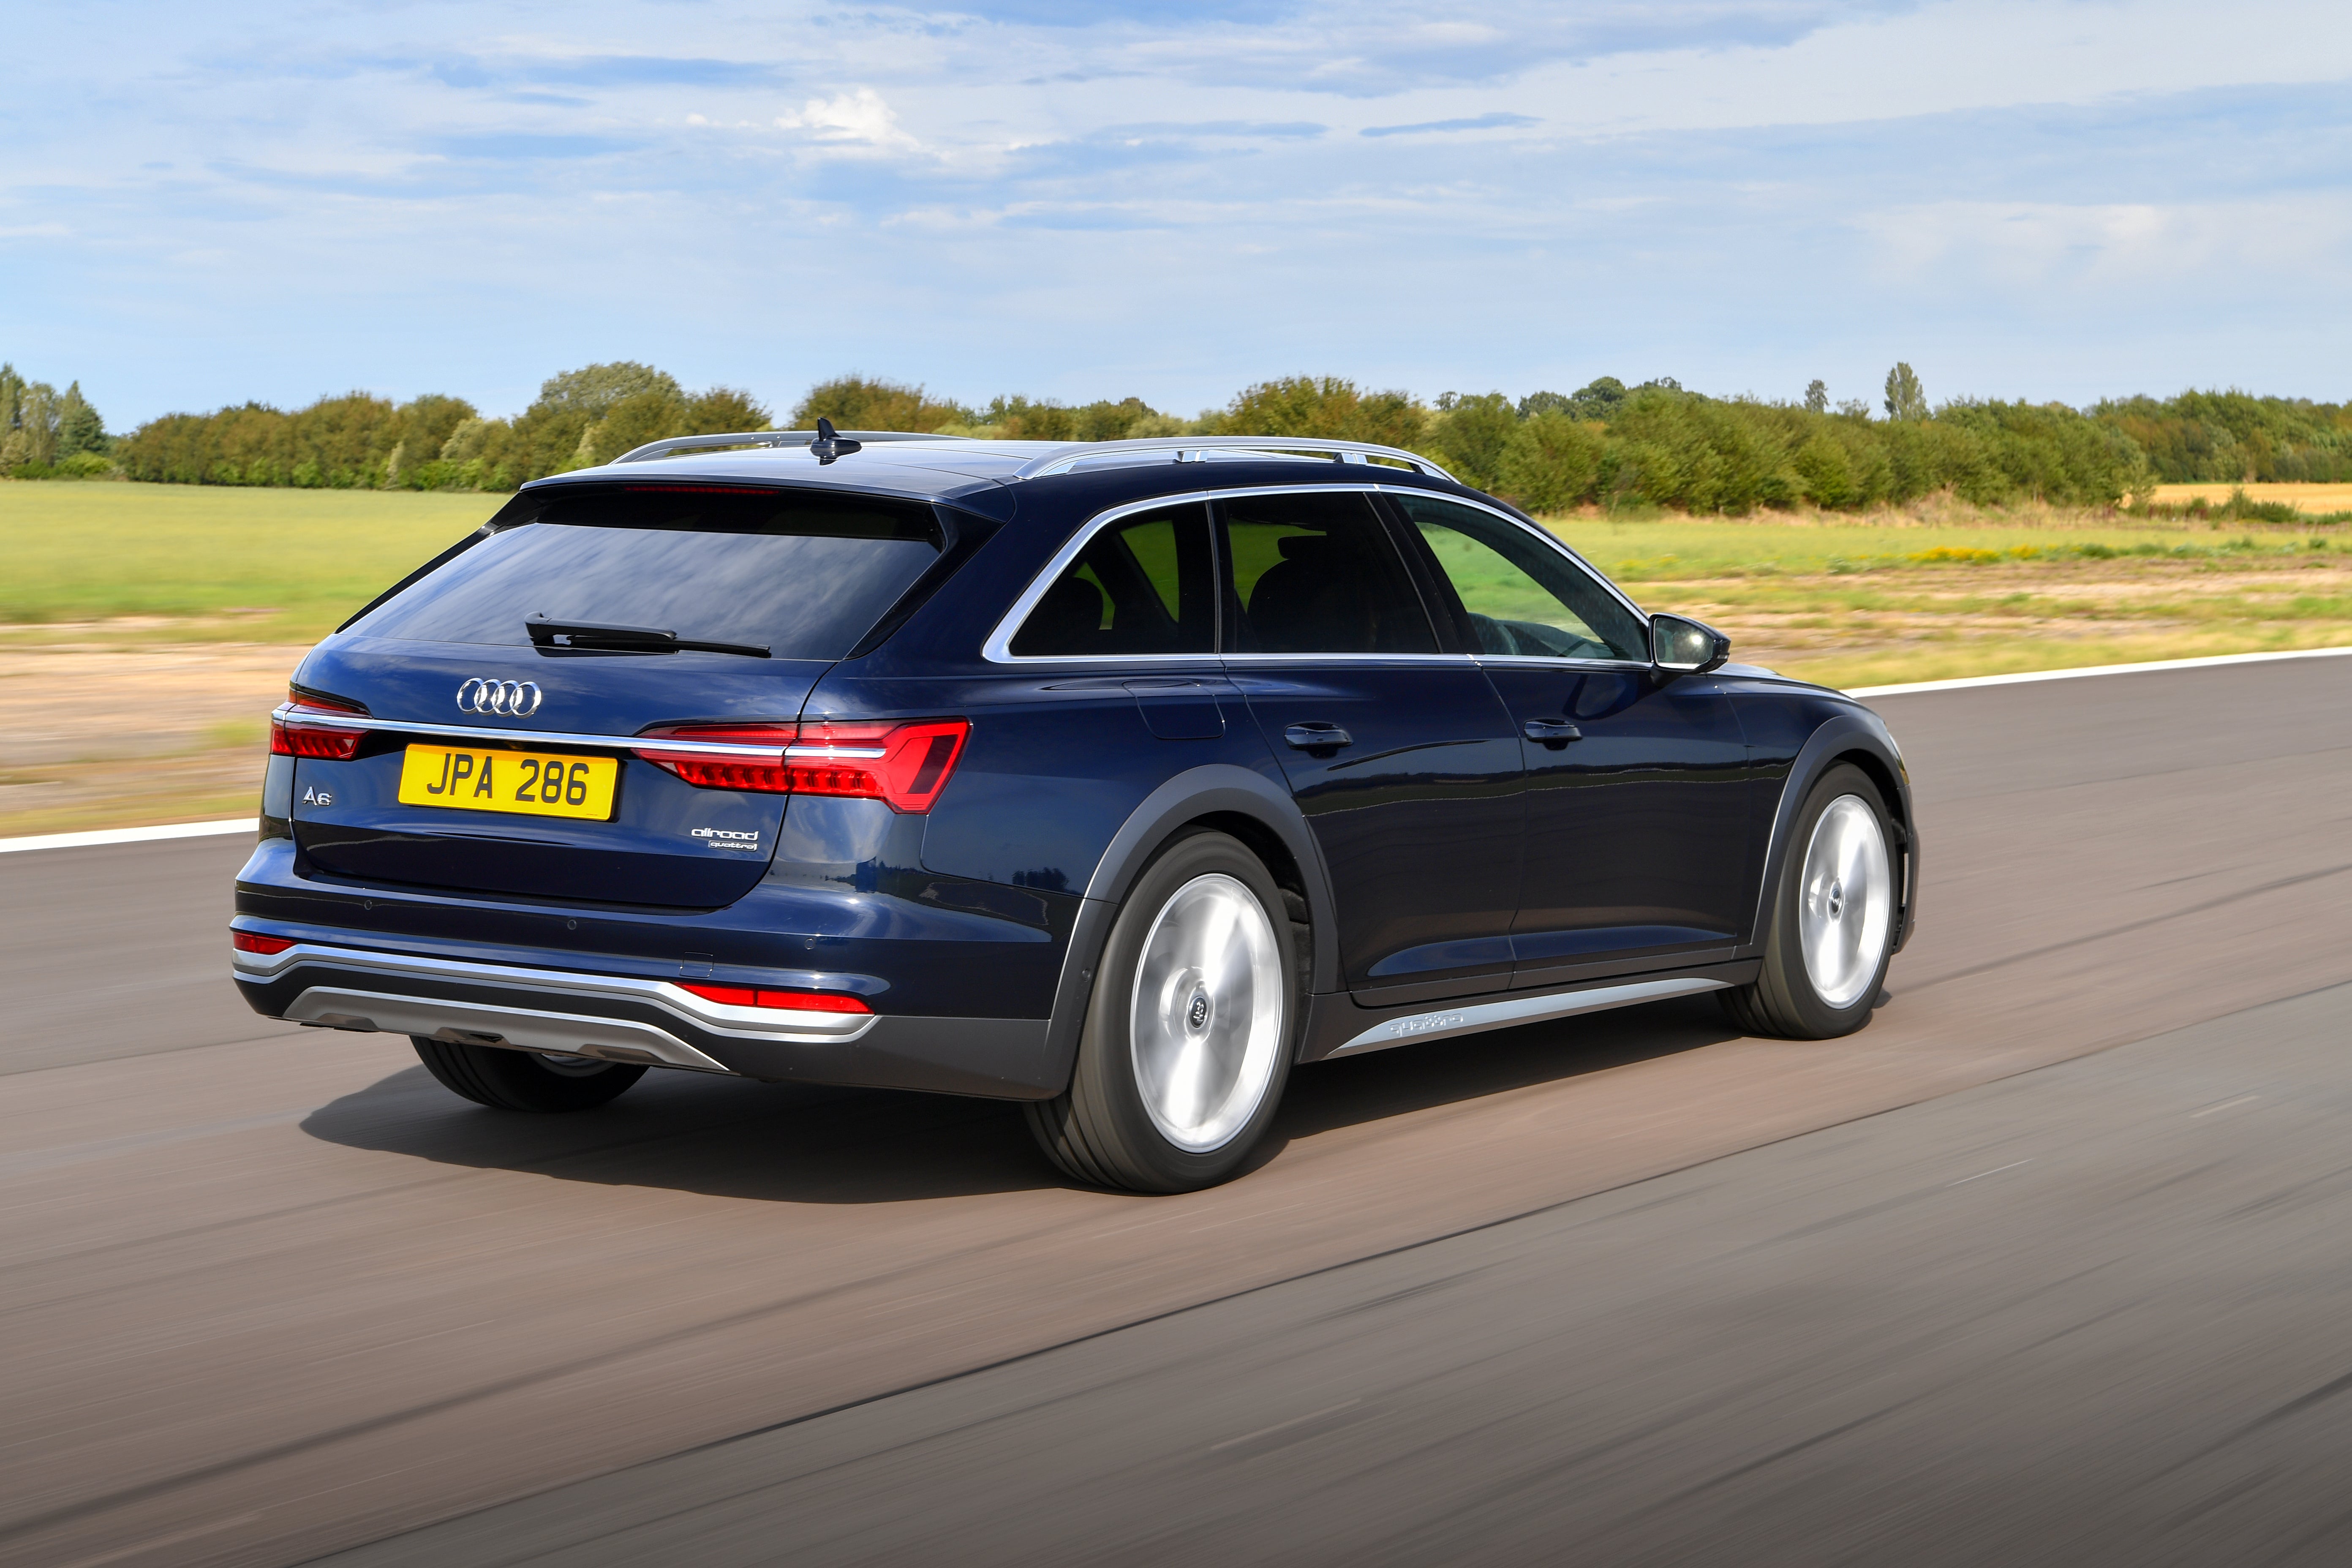 Audi A6 Allroad Review 2023: exterior rear three quarter photo of the Audi A6 Allroad on the road